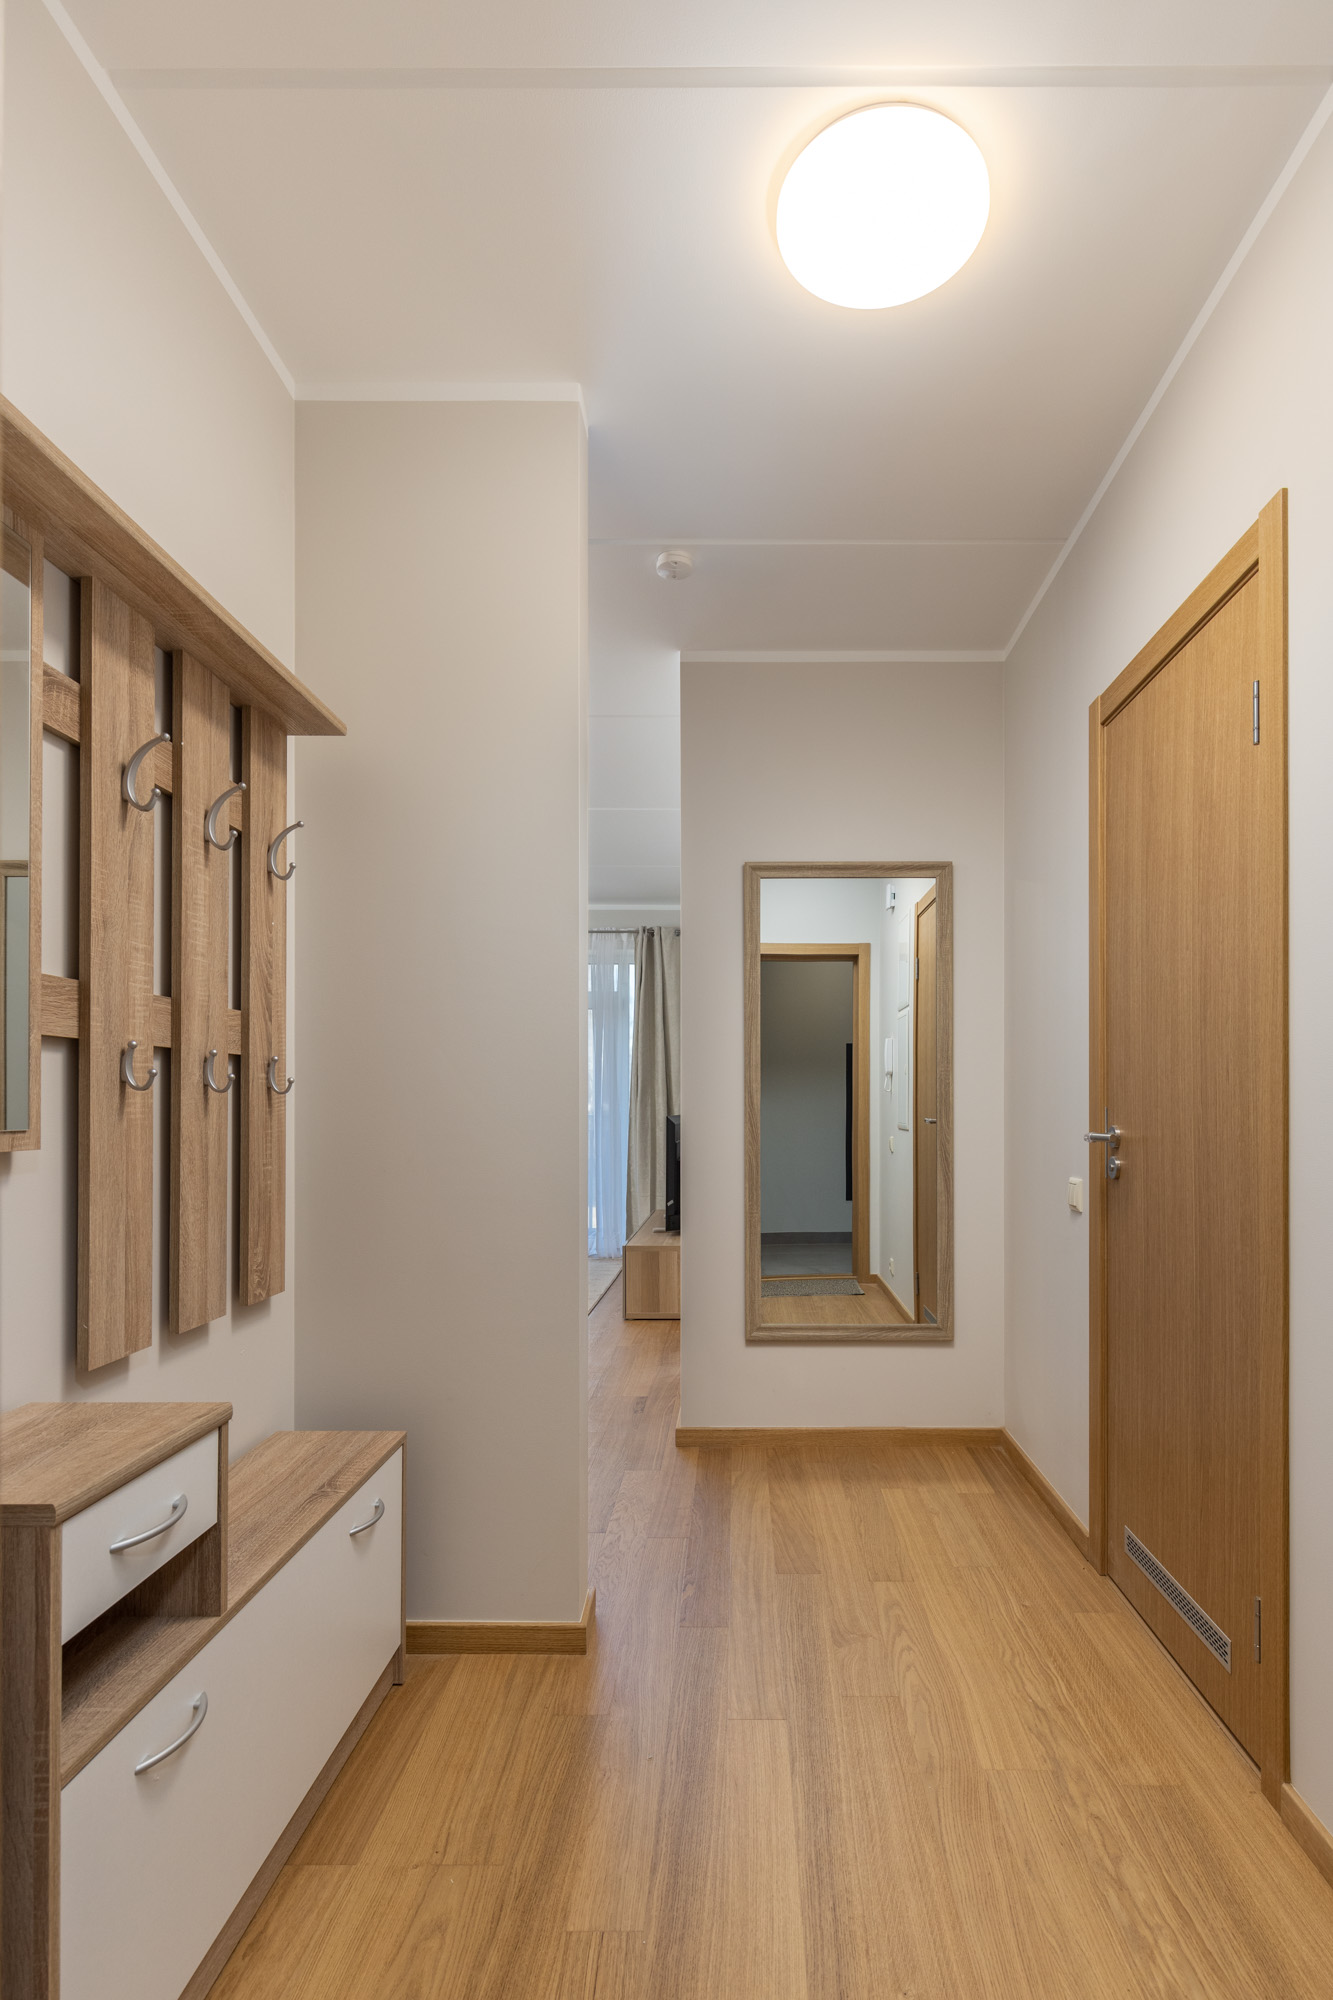 Apartment for sale, Stirnu street 38a - Image 1